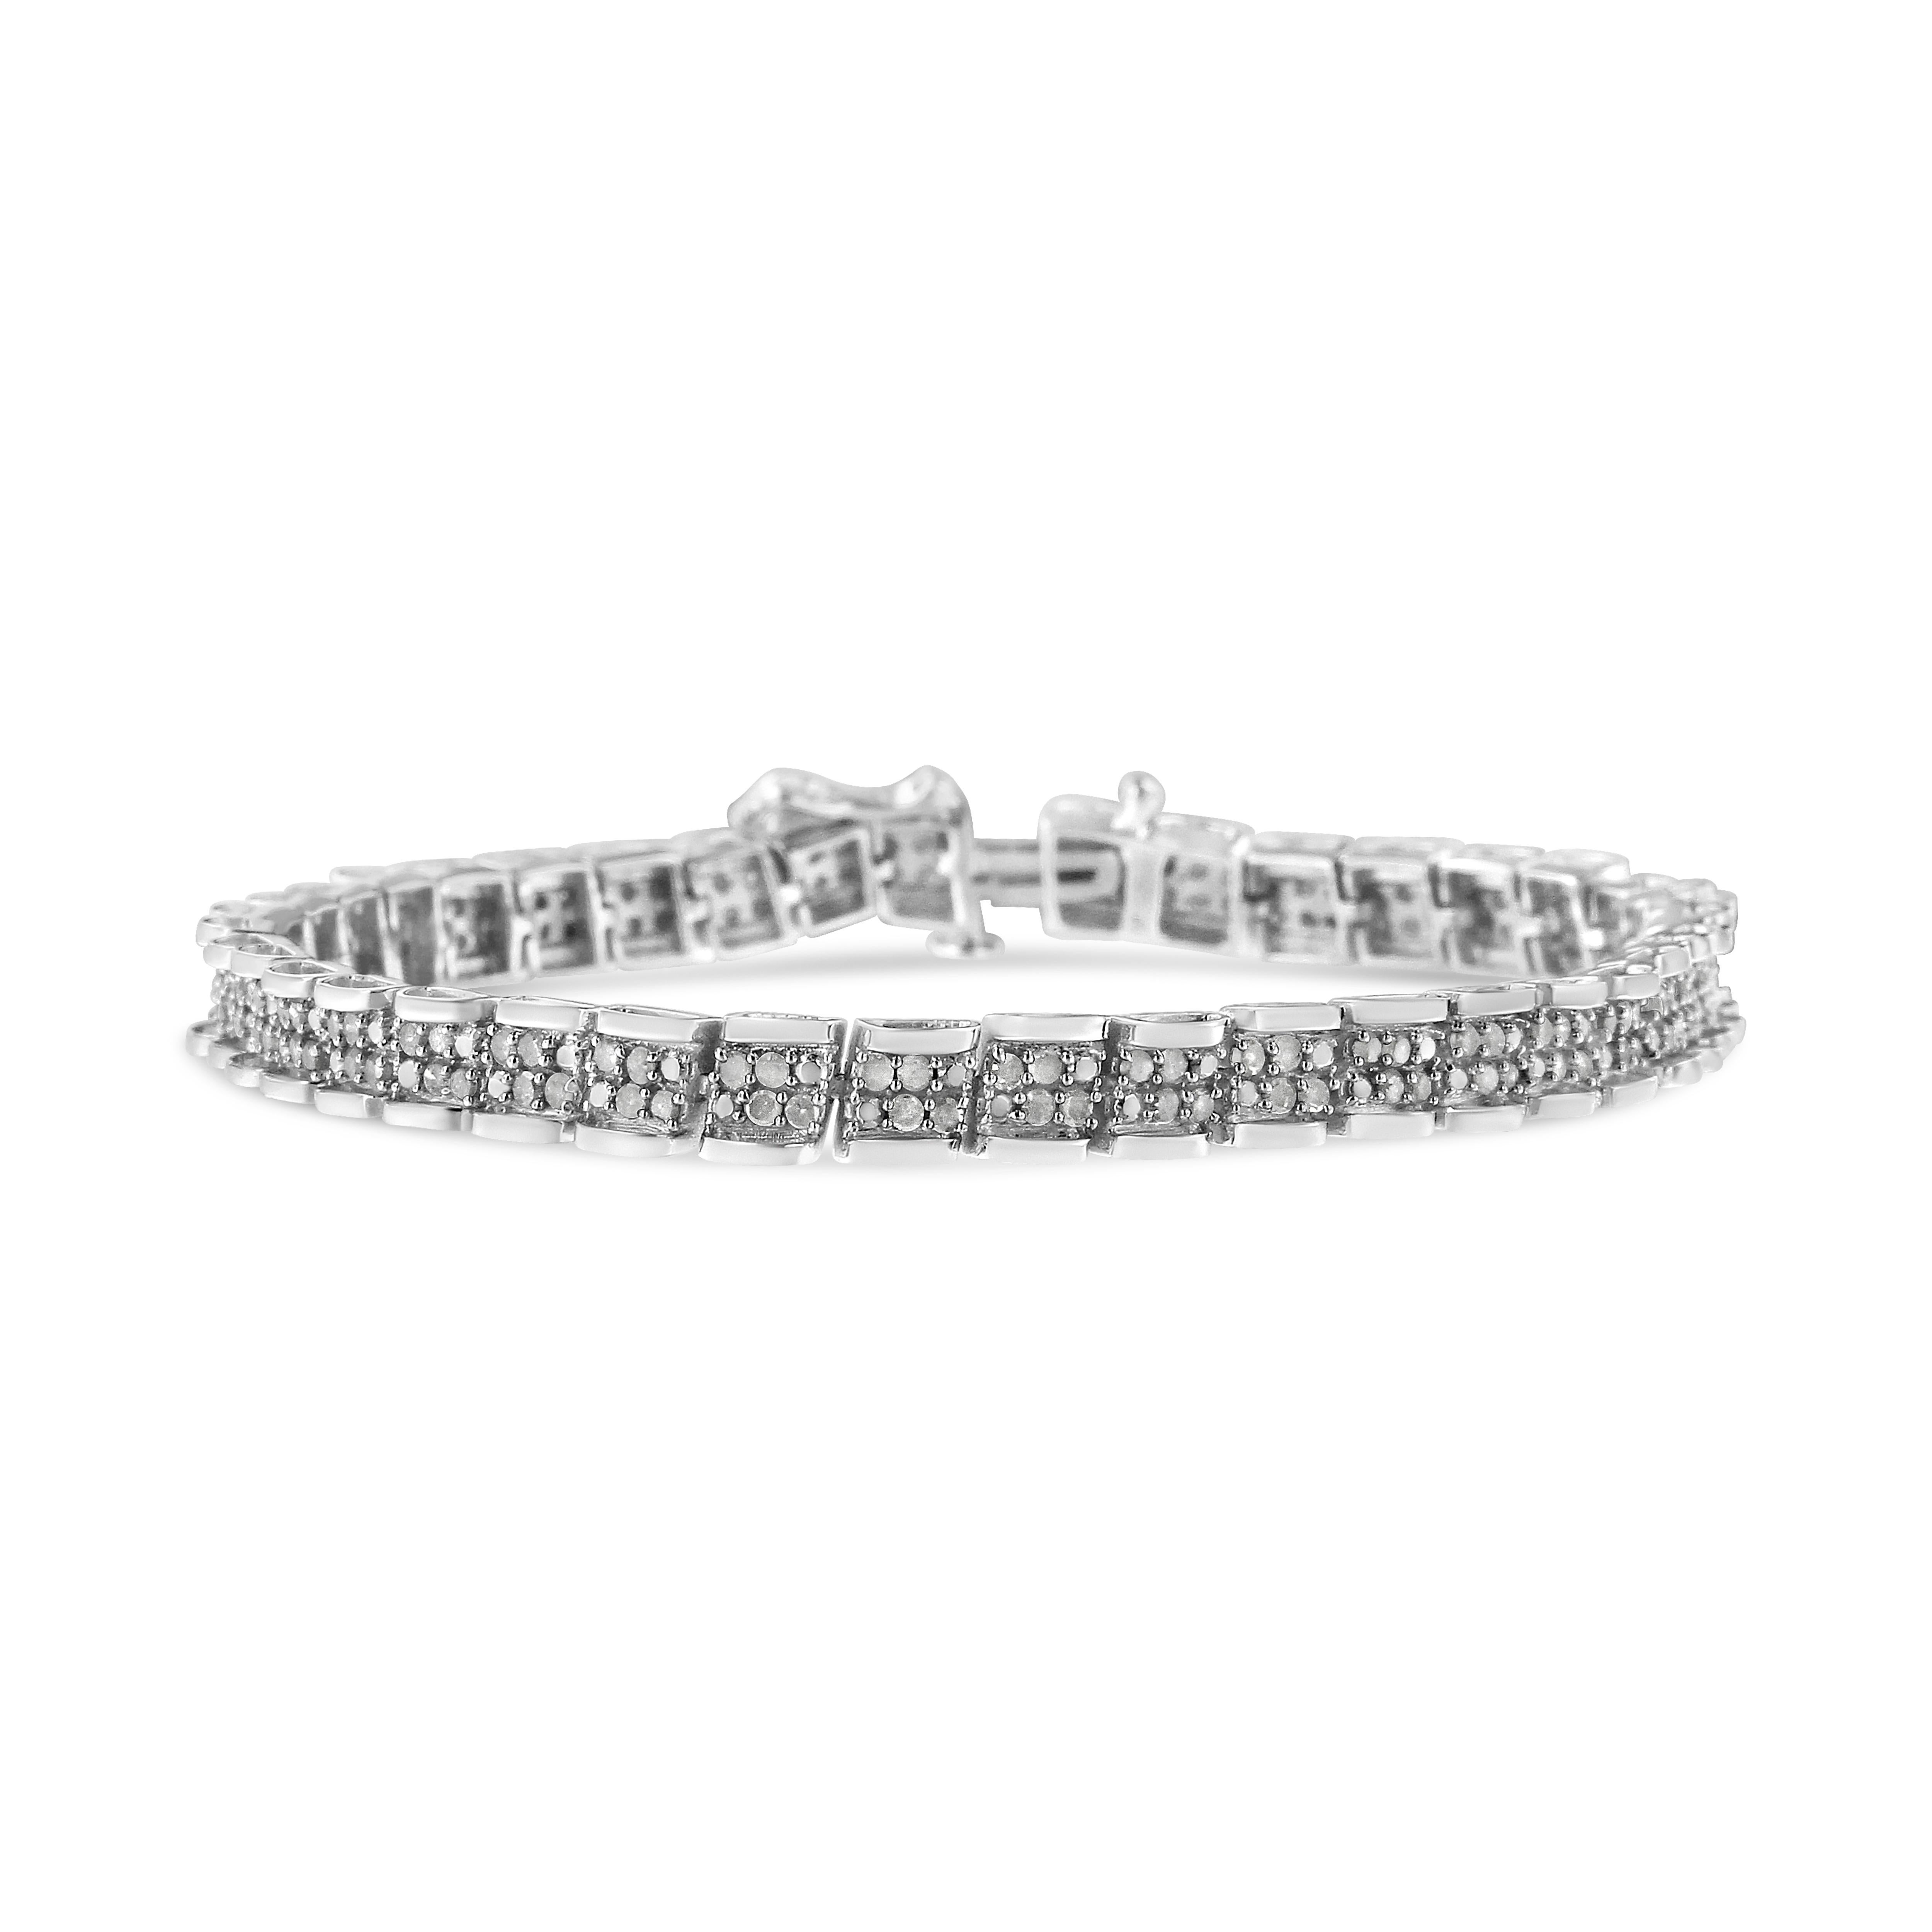 Dress up any outfit with this fabulous sterling silver link bracelet. This bracelet is embellished with 160 rose-cut promo quality diamonds, which are on the lowest of the diamond color and quality scale. Rose-cut, promo quality diamonds are milky